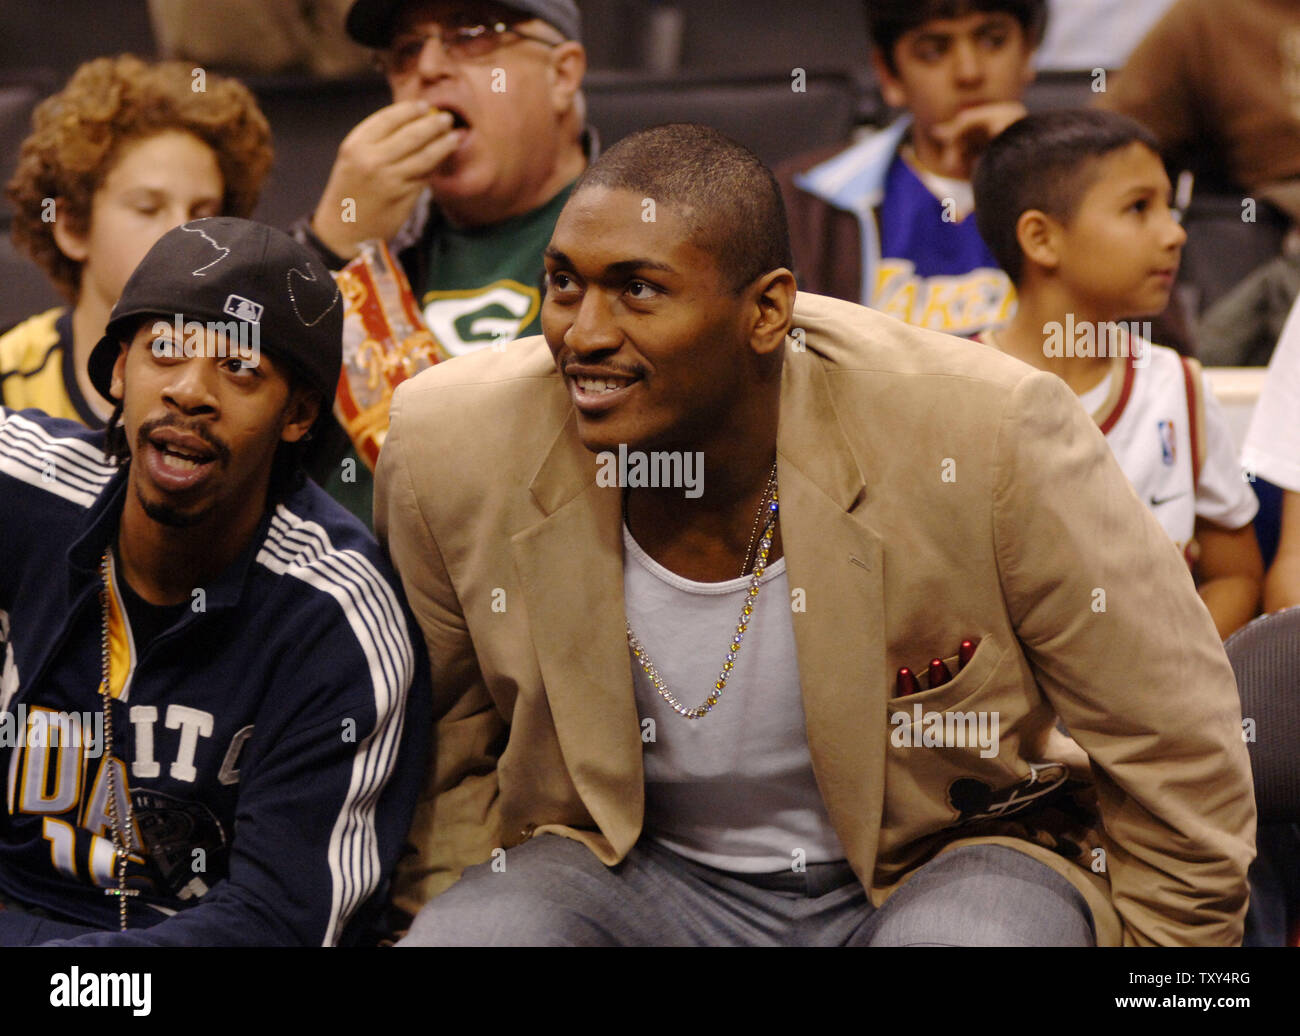 Indiana Pacers' Ron Artest (R) watches the Los Angeles Lakers' NBA basketball game against the Cleveland Cavaliers in Los Angeles on January 12, 2006.  Artest, the 2003-04 NBA defensive player of the year, was averaging 19.4 points when he voiced his desire to be traded last month. He later recanted that statement, but team president Larry Bird and Walsh have said they are no longer interested in having him play for Indiana. Artest hasn't played in a game since Dec. 6.  (UPI Photo/Jim Ruymen) Stock Photo